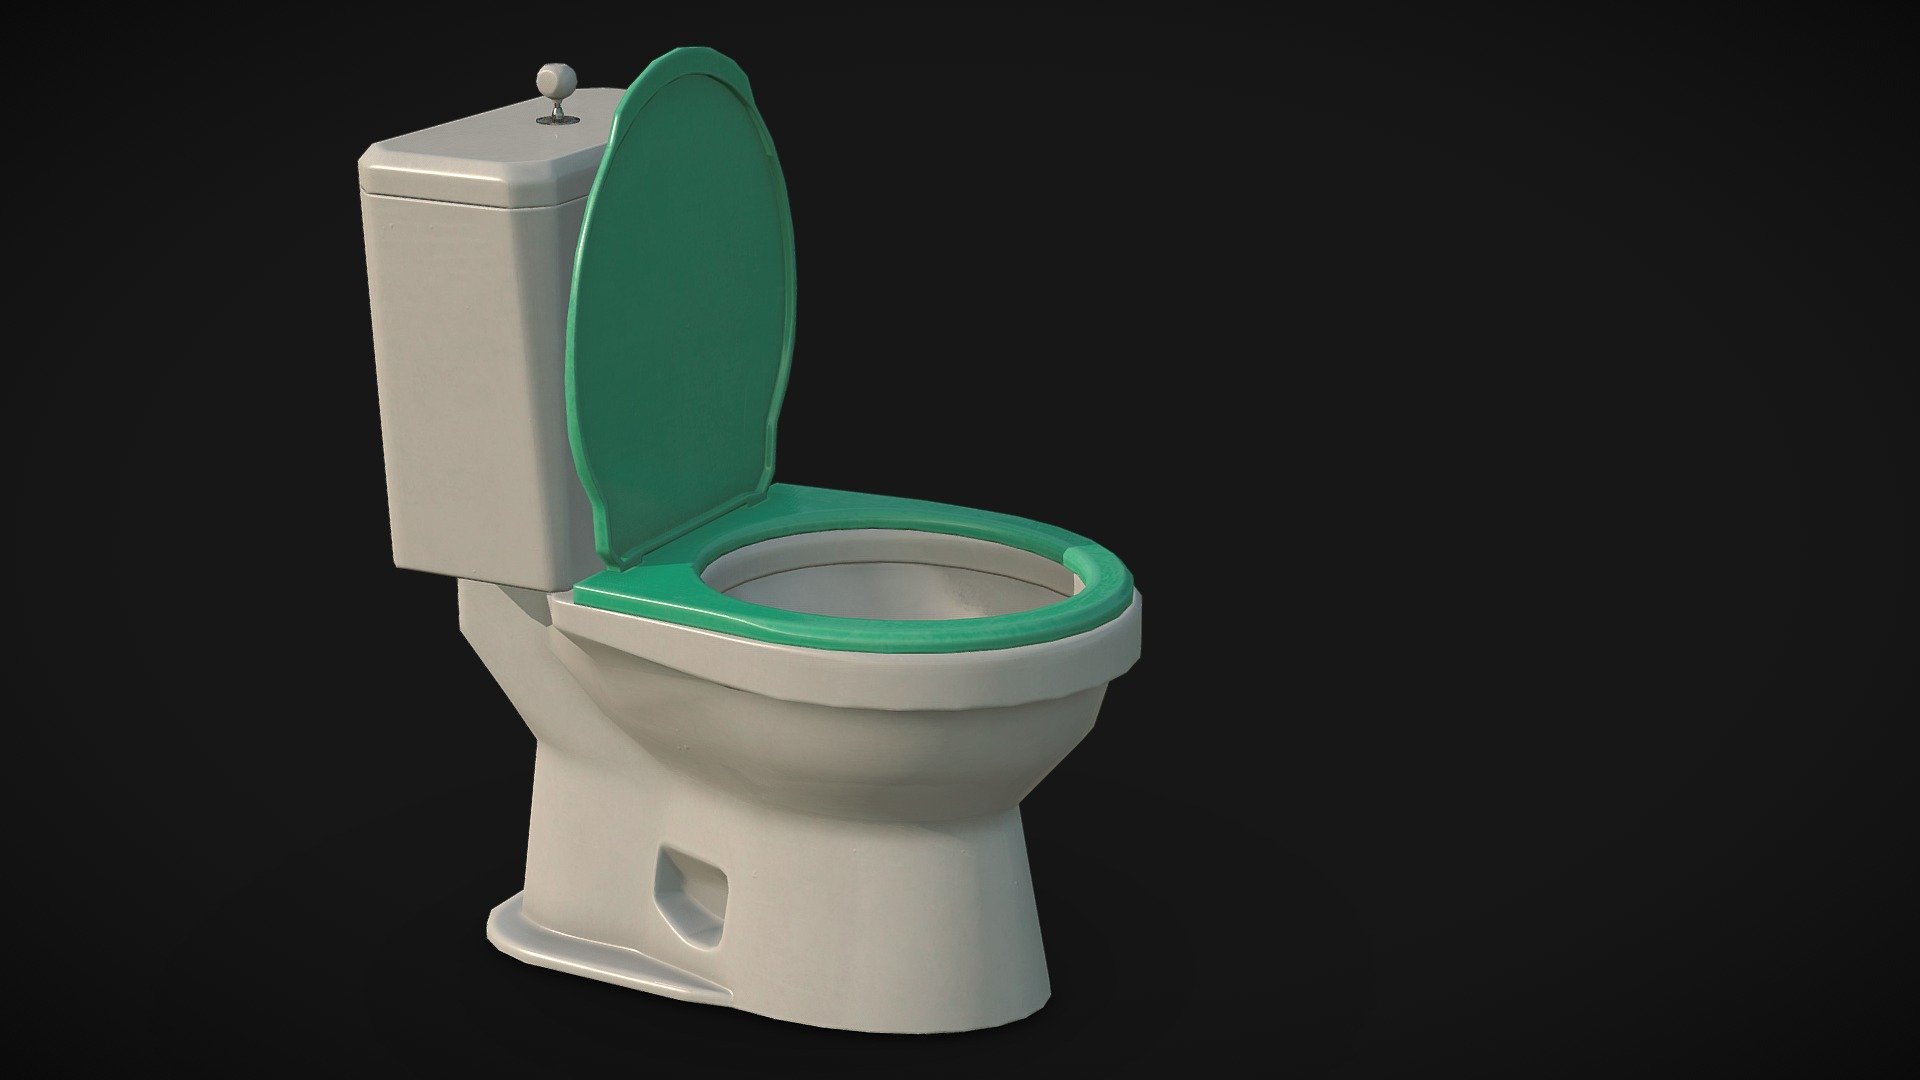 Toilet

low-poly 3d model ready for Virtual Reality (VR), Augmented Reality (AR), games and other real-time apps. Toilet is lowpoly, gameready prop 3d model for game or other project with pbr maps Polygons total - 1290 - SM Toilet - 3D model by Evgenii Sobolev (@ESobolev) 3d model